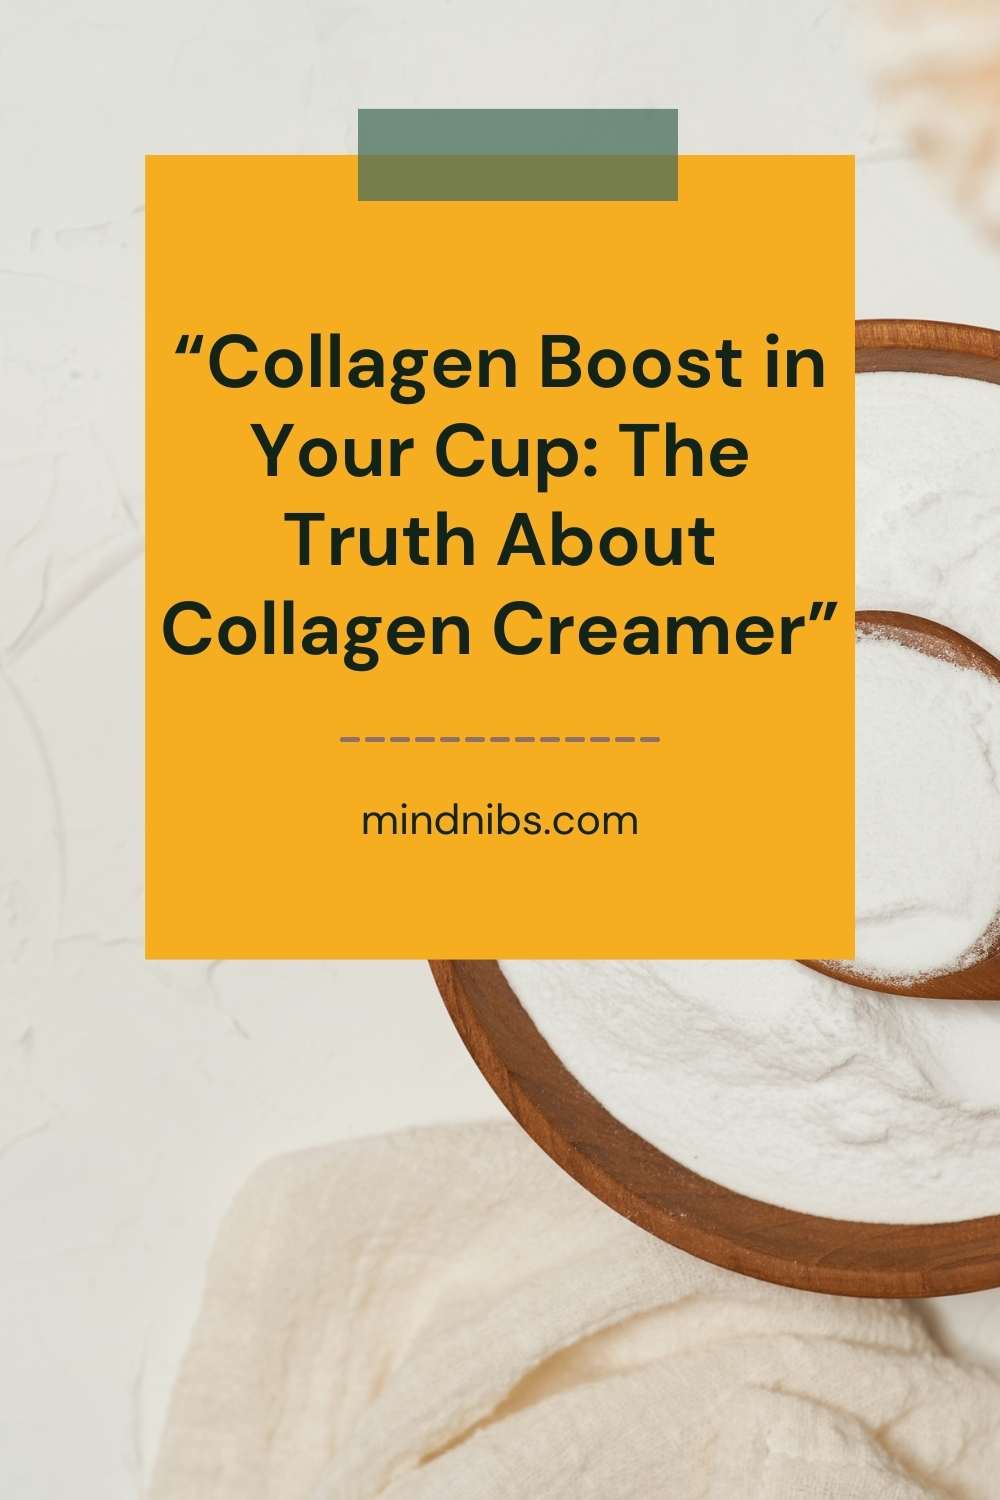 “Collagen Boost in Your Cup: The Truth About Collagen Creamer